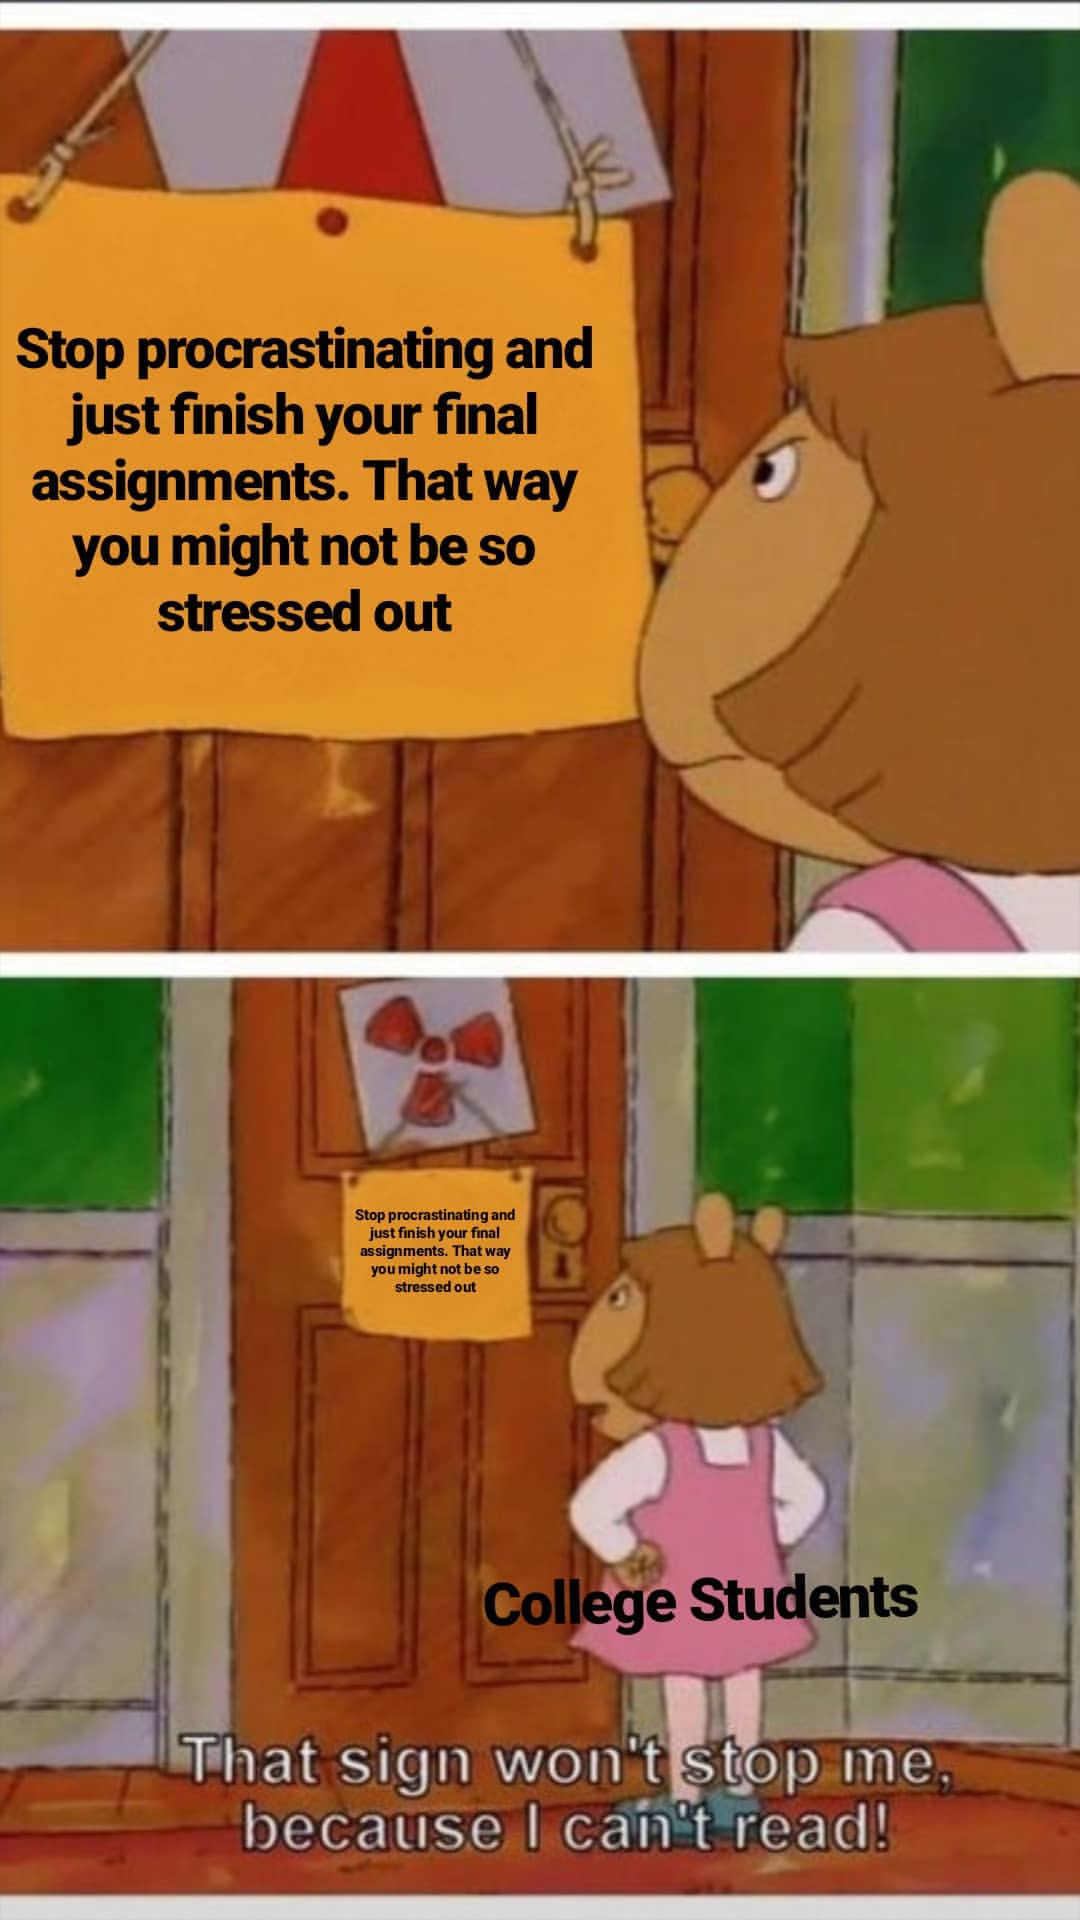 r/collegememes- college dank memes - sign won t stop me because - Stop procrastinating and just finish your final assignments. That way you might not be so stressed out College Students That sign won't stop me. because I can't read!